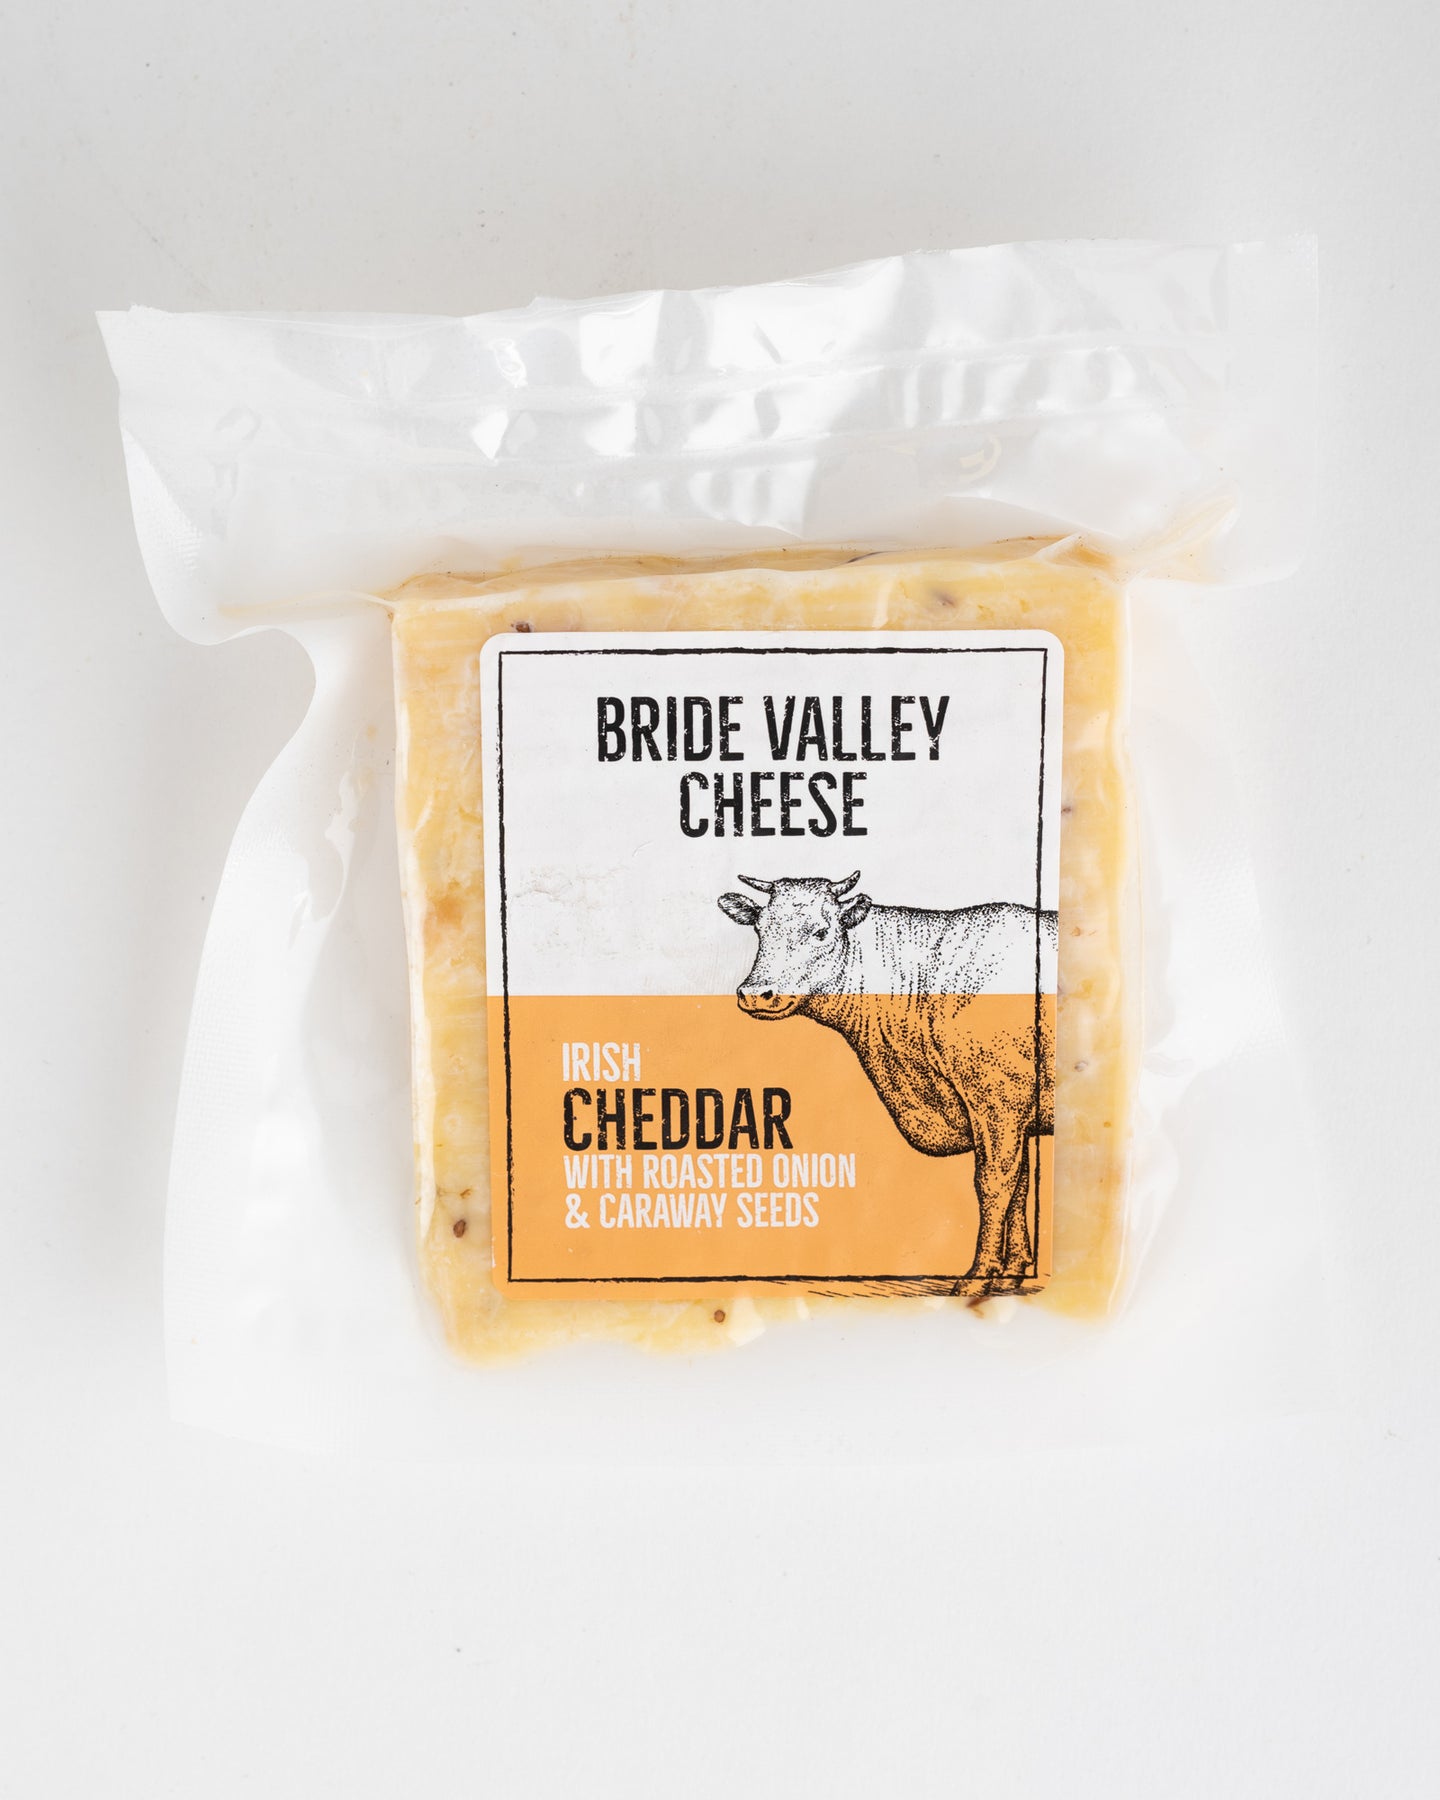 Bride Valley Cheese - Irish Cheddar with Roasted Onion & Caraway Seeds